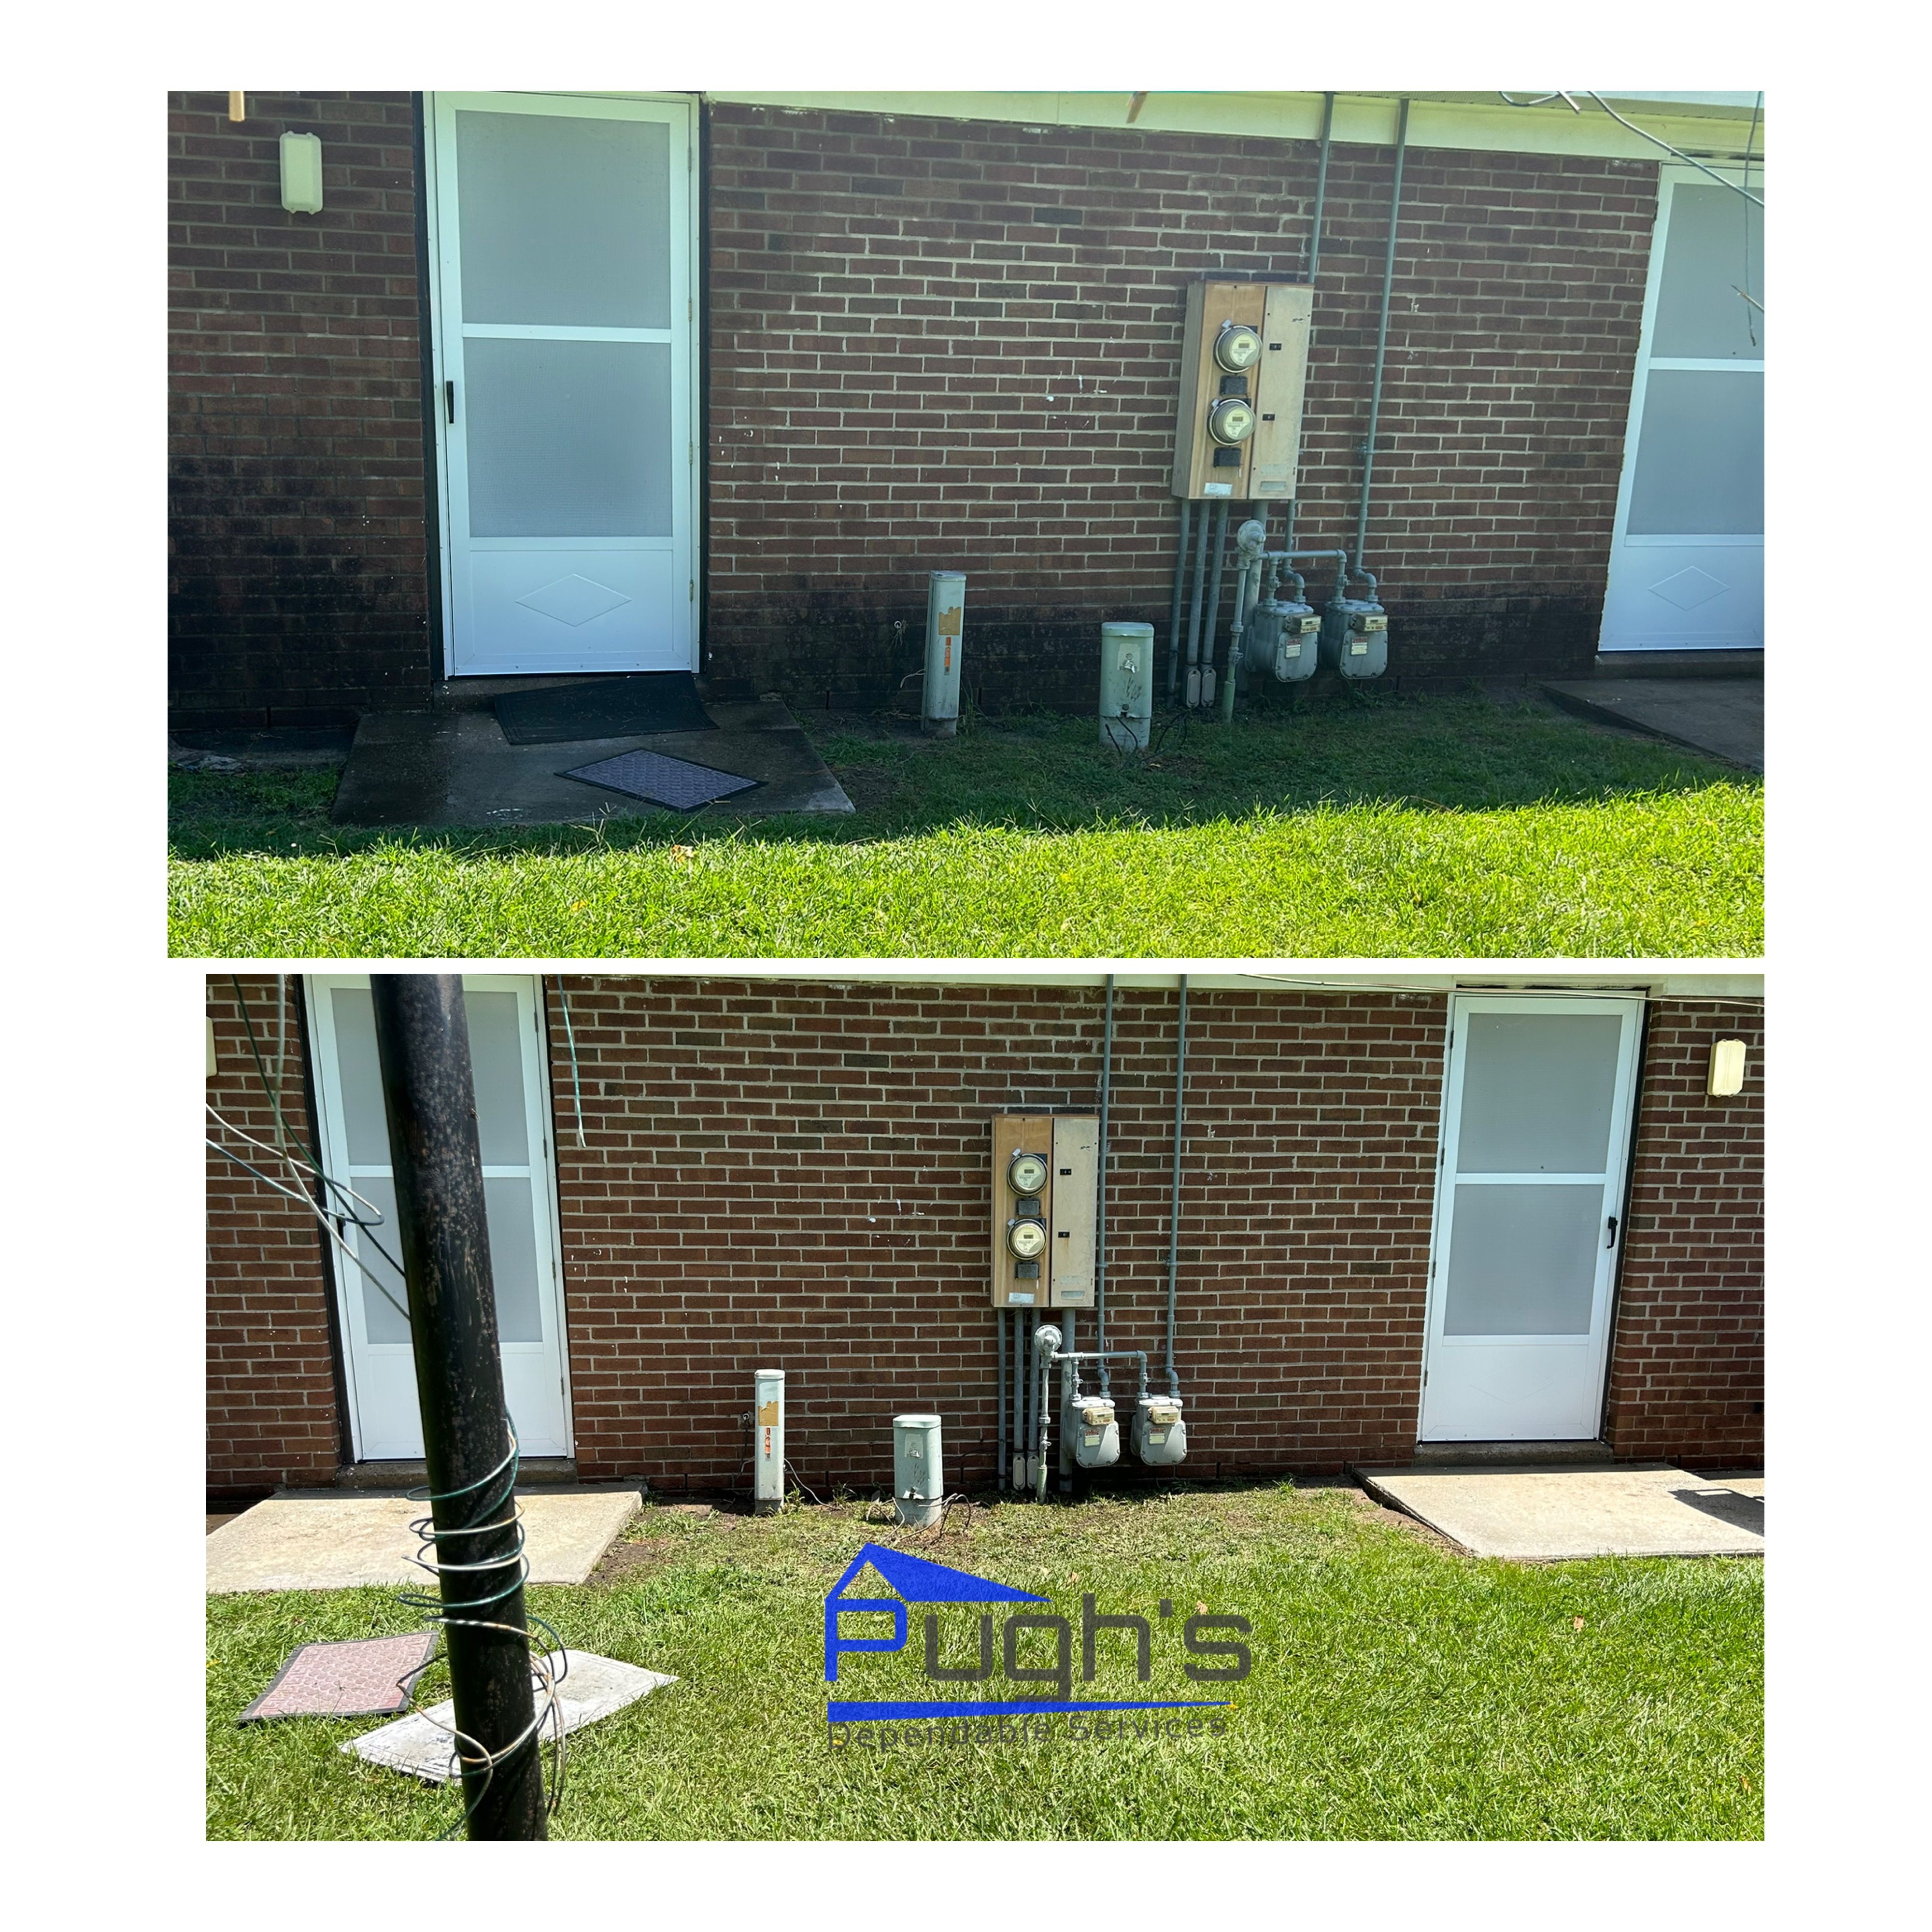 Brick Cleaning for Pugh's Dependable Services, L.L.C. in Raleigh, NC